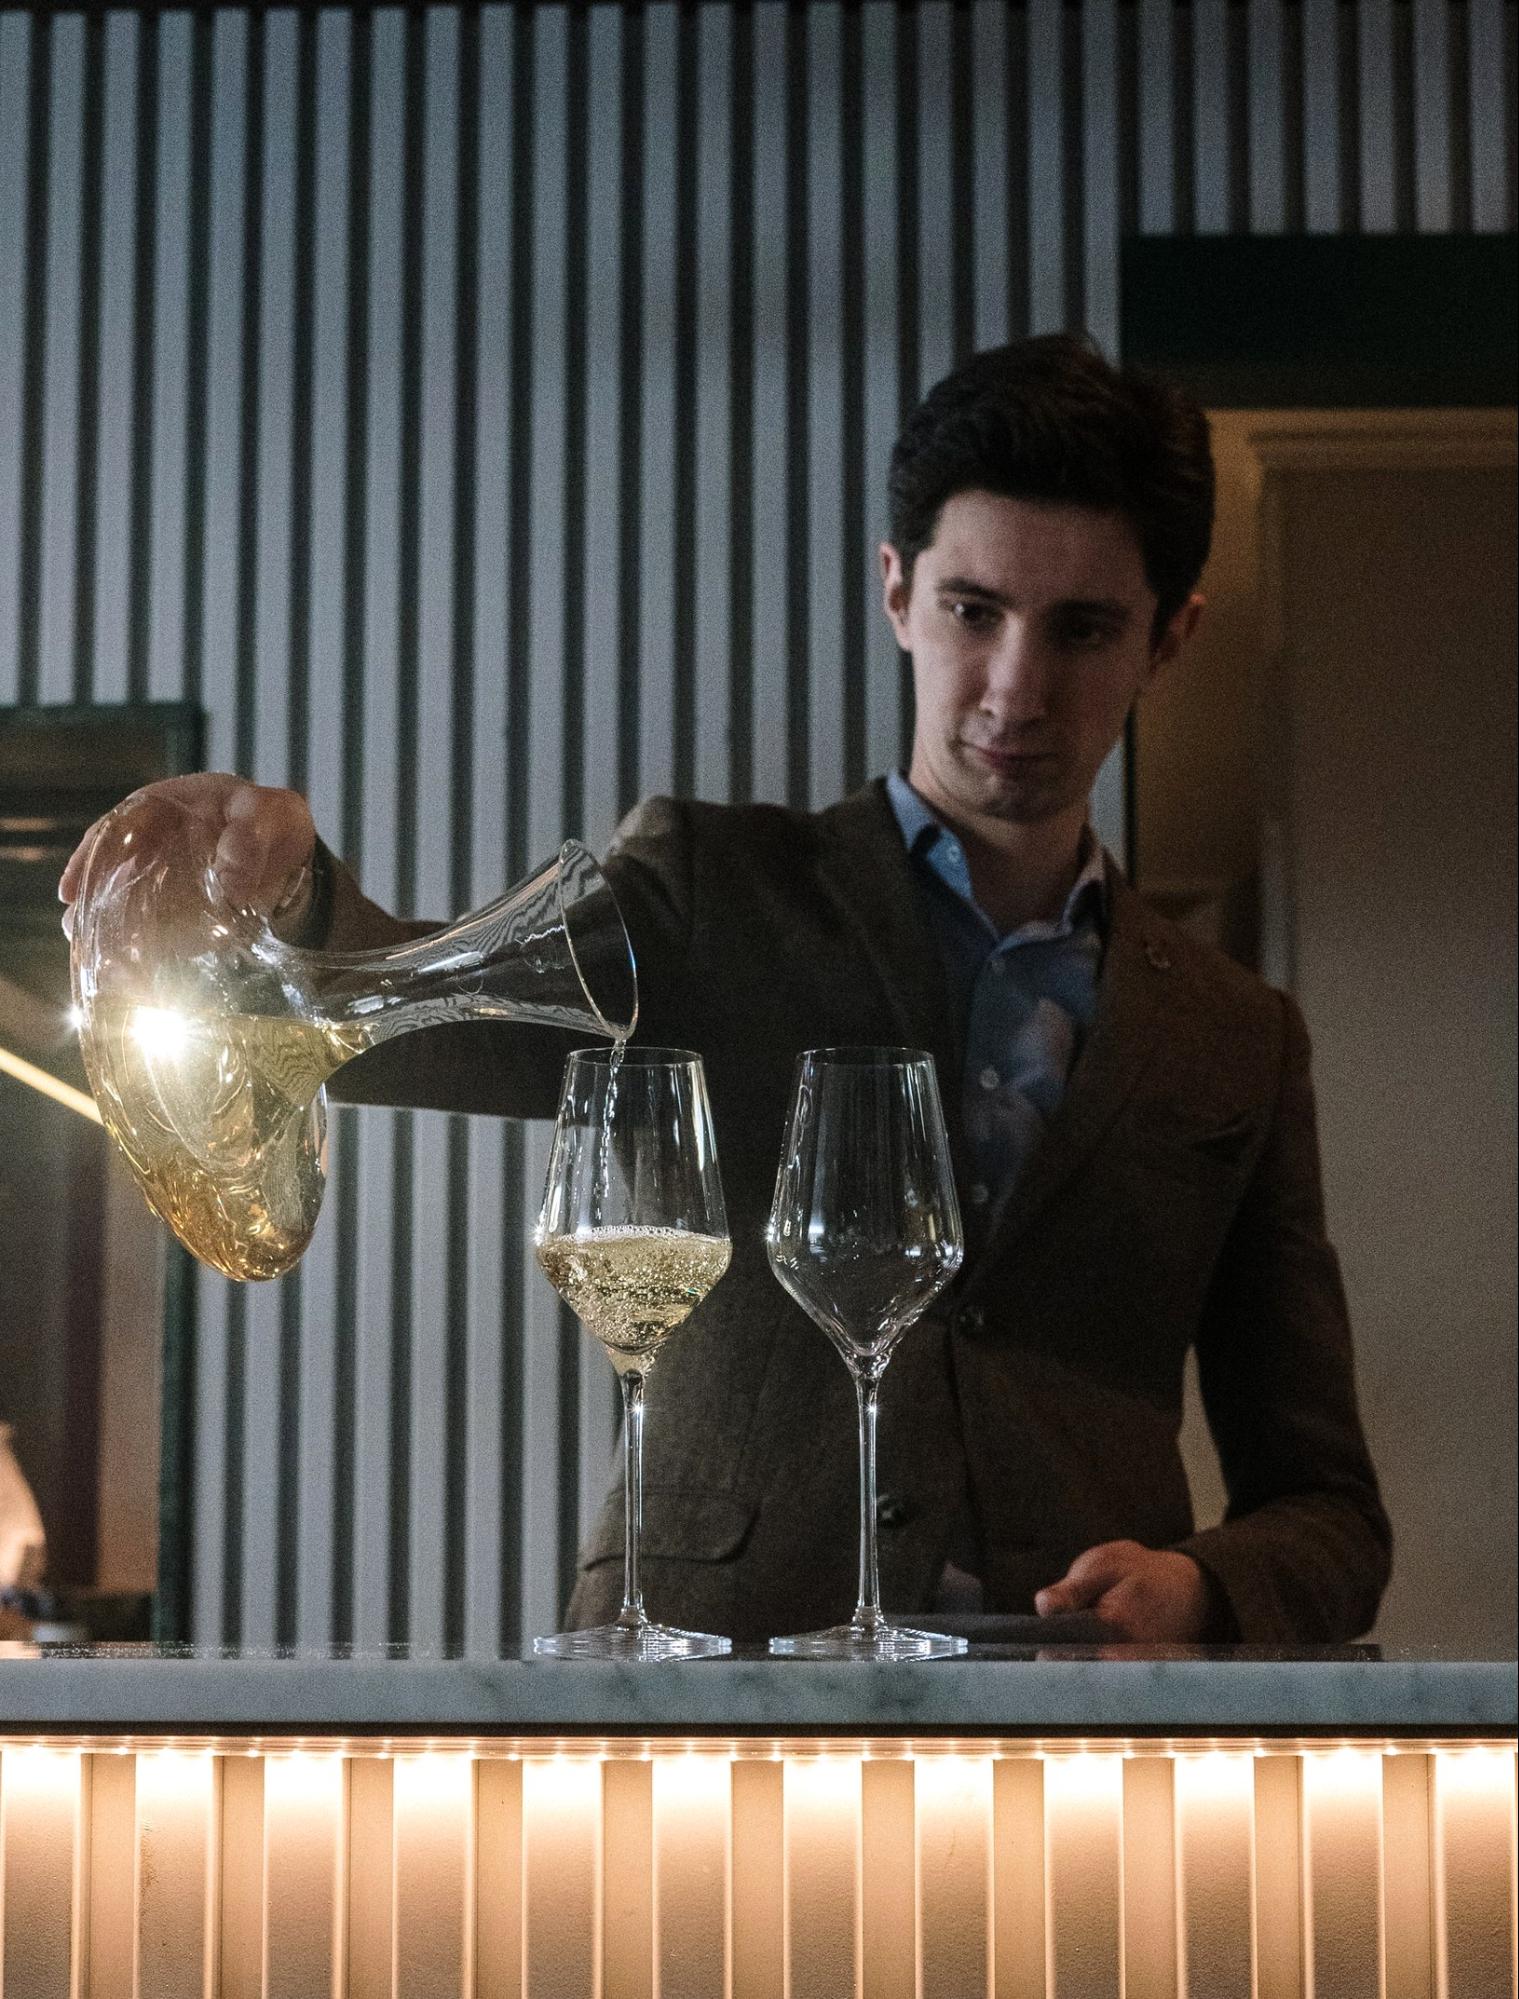 Man pouring white wine; Wine sommelier